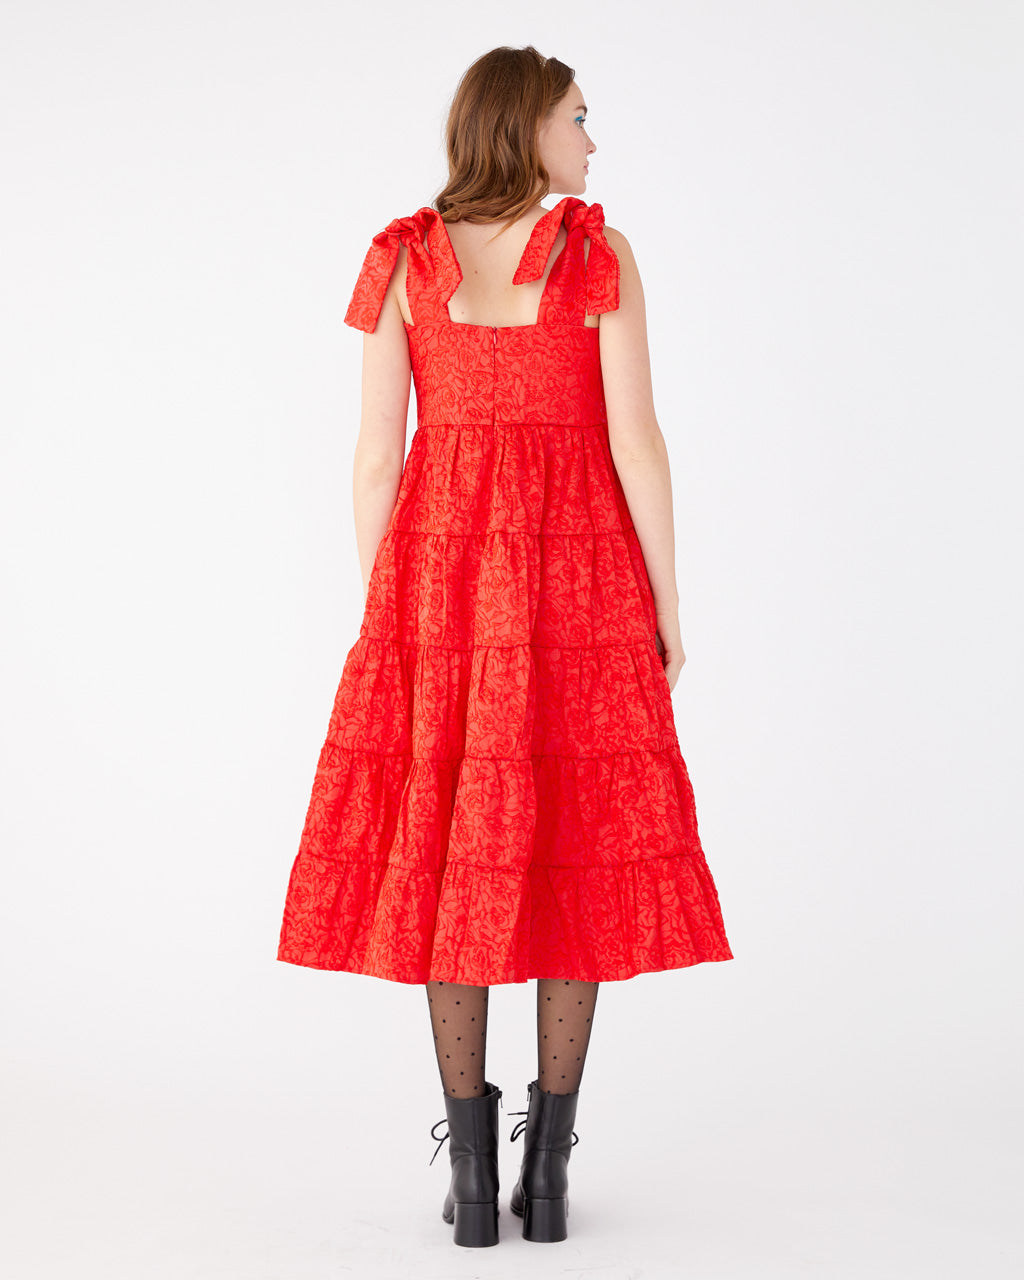 Likely Lady Rose Midi Dress by sister jane - dress - ban.do